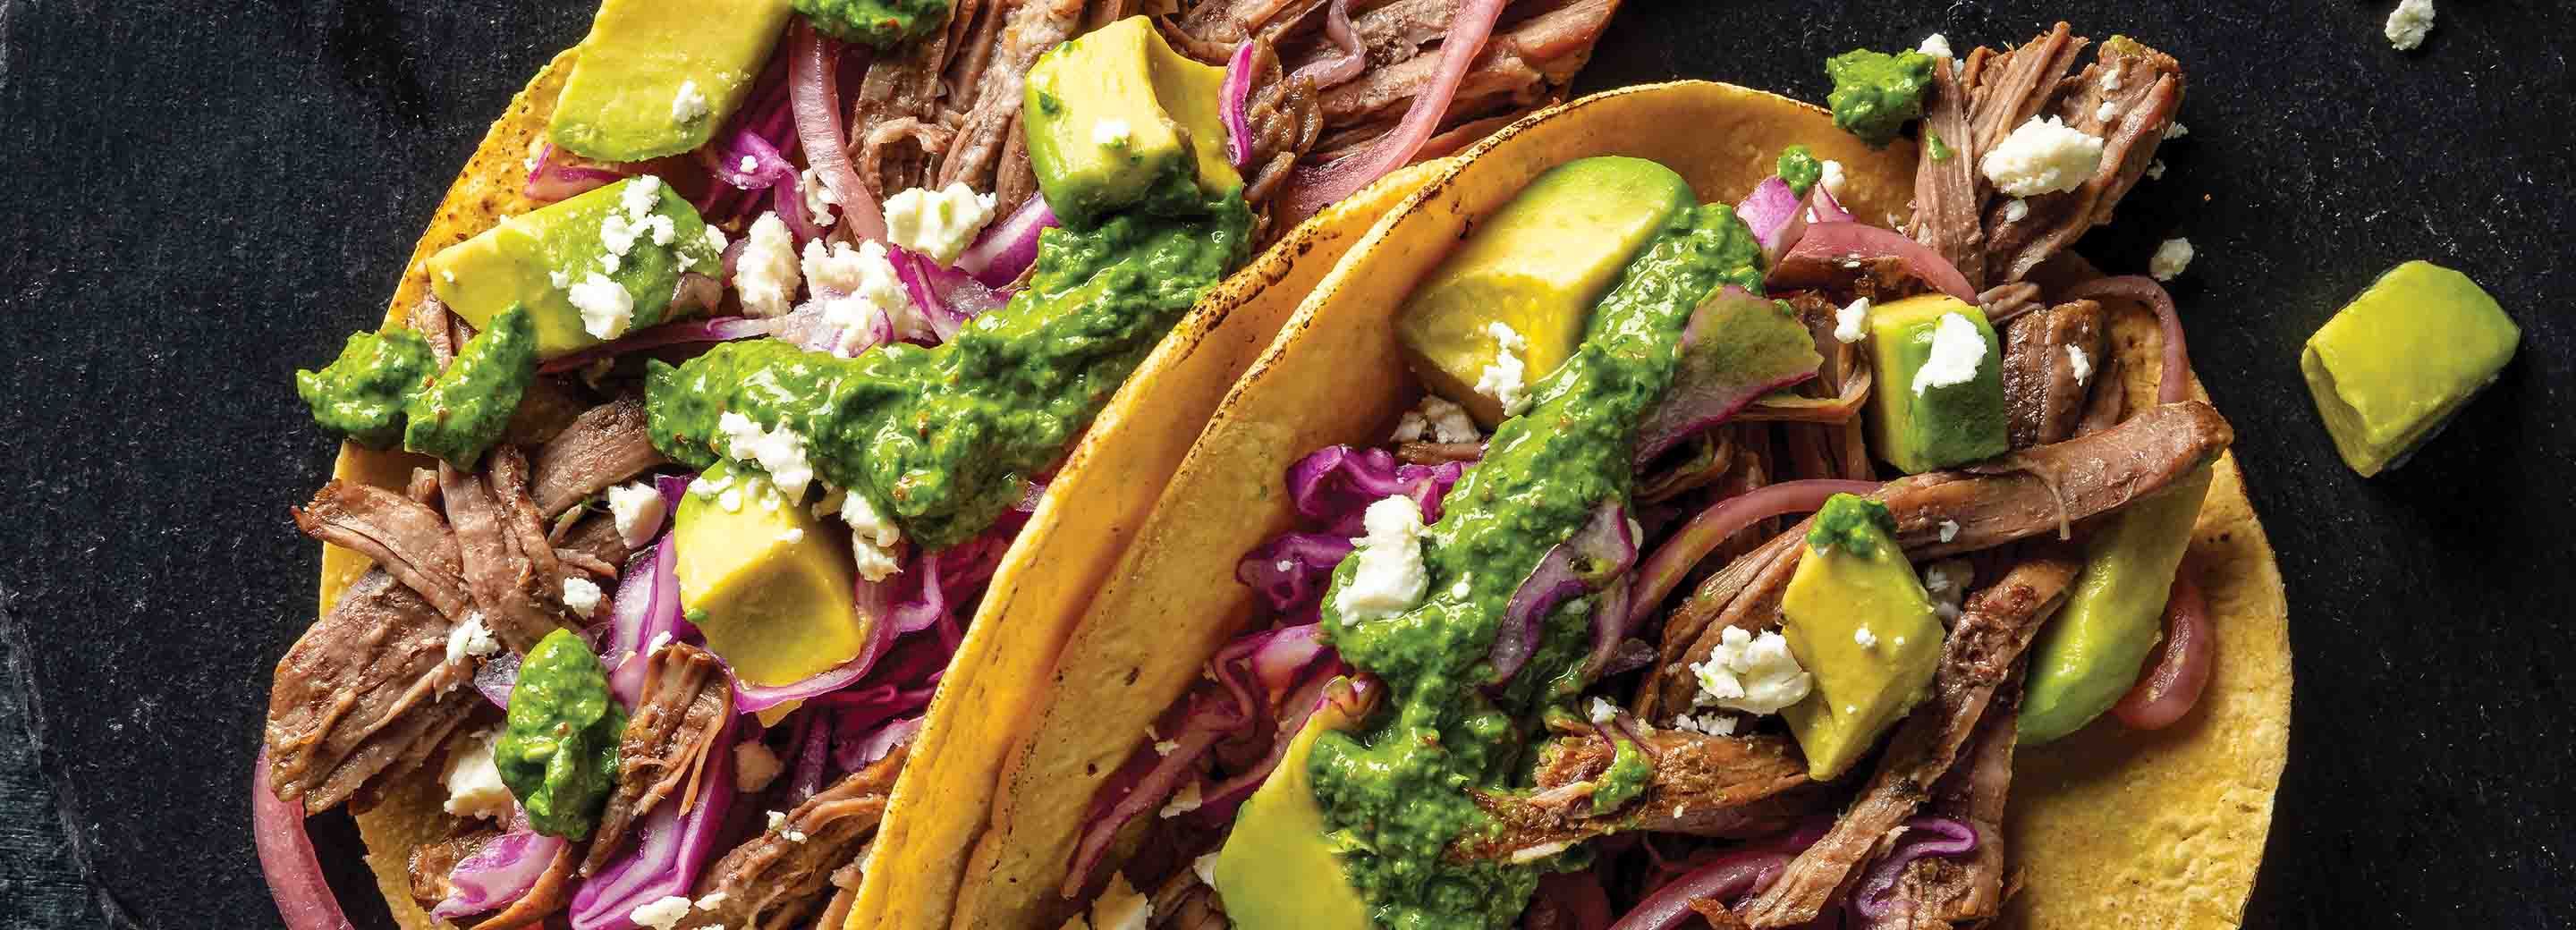 Braised Beef Tacos with Chimichurri